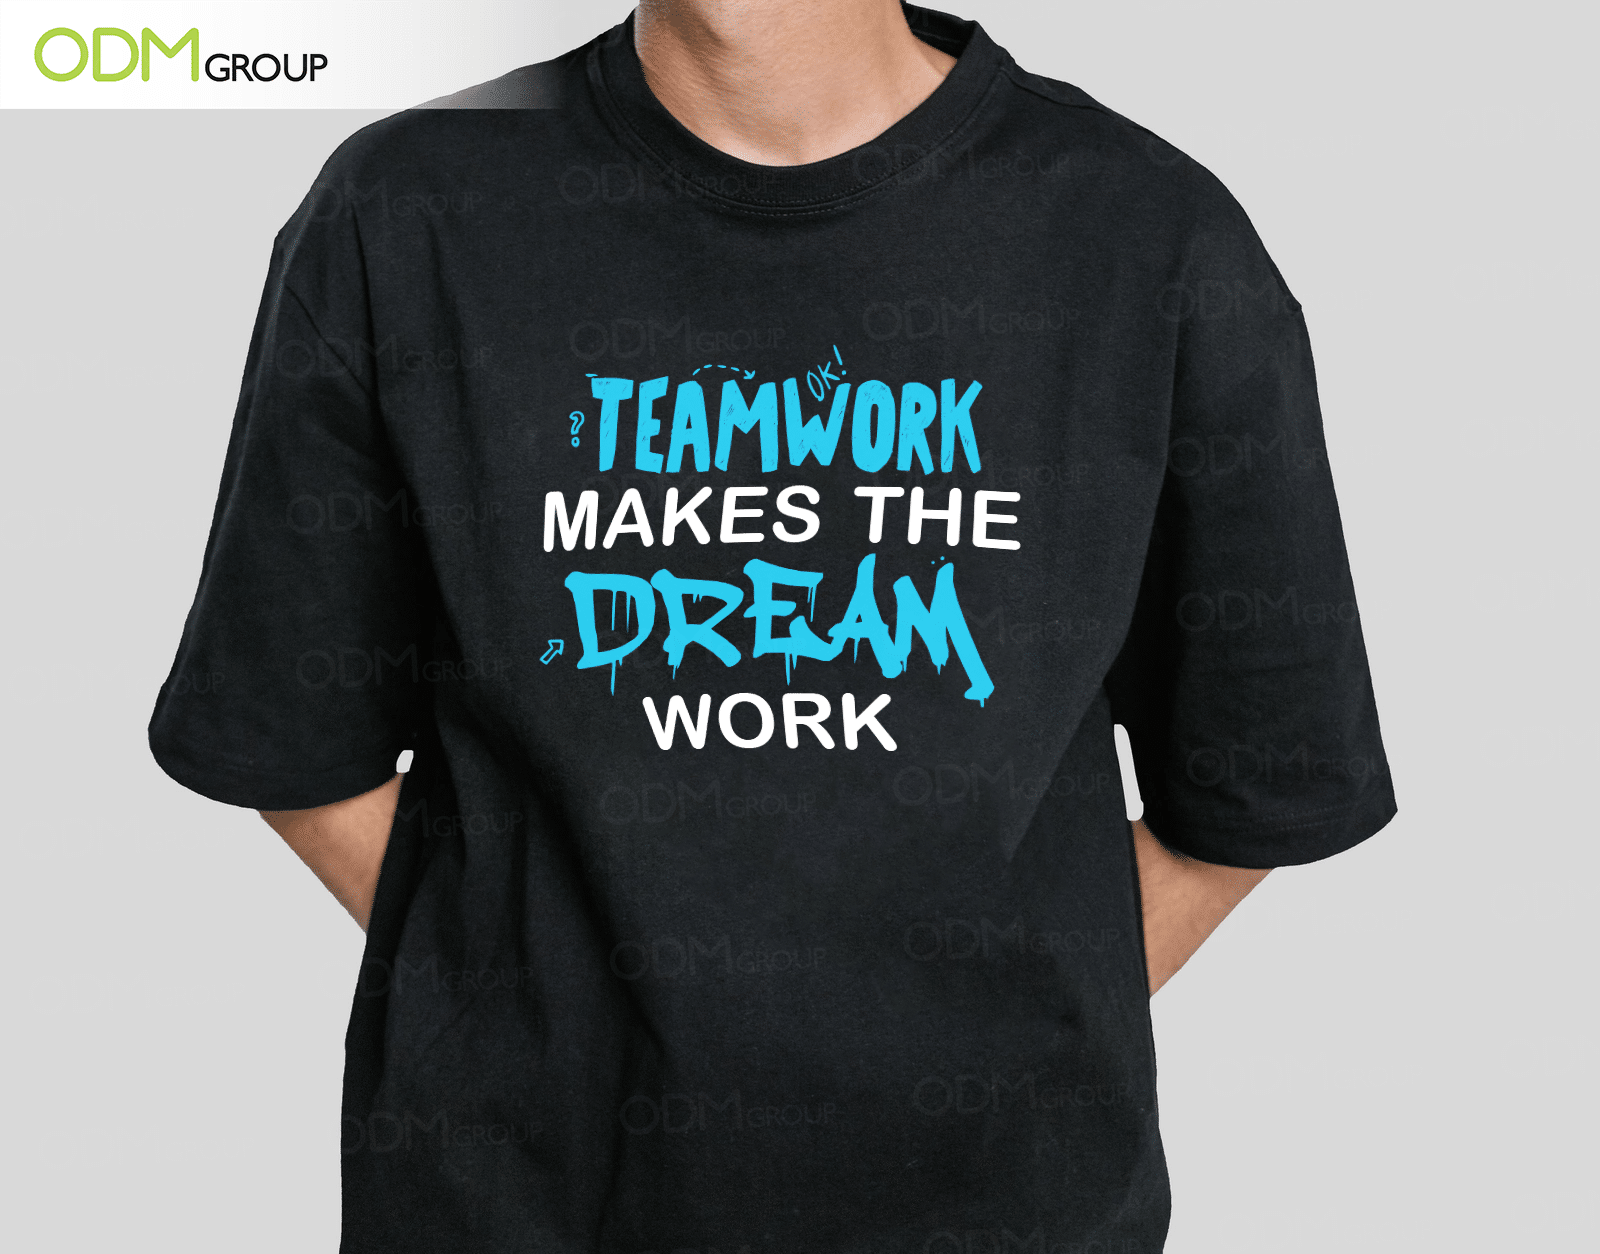 Black t-shirt with the phrase "Teamwork makes the dream work" in blue and white text.